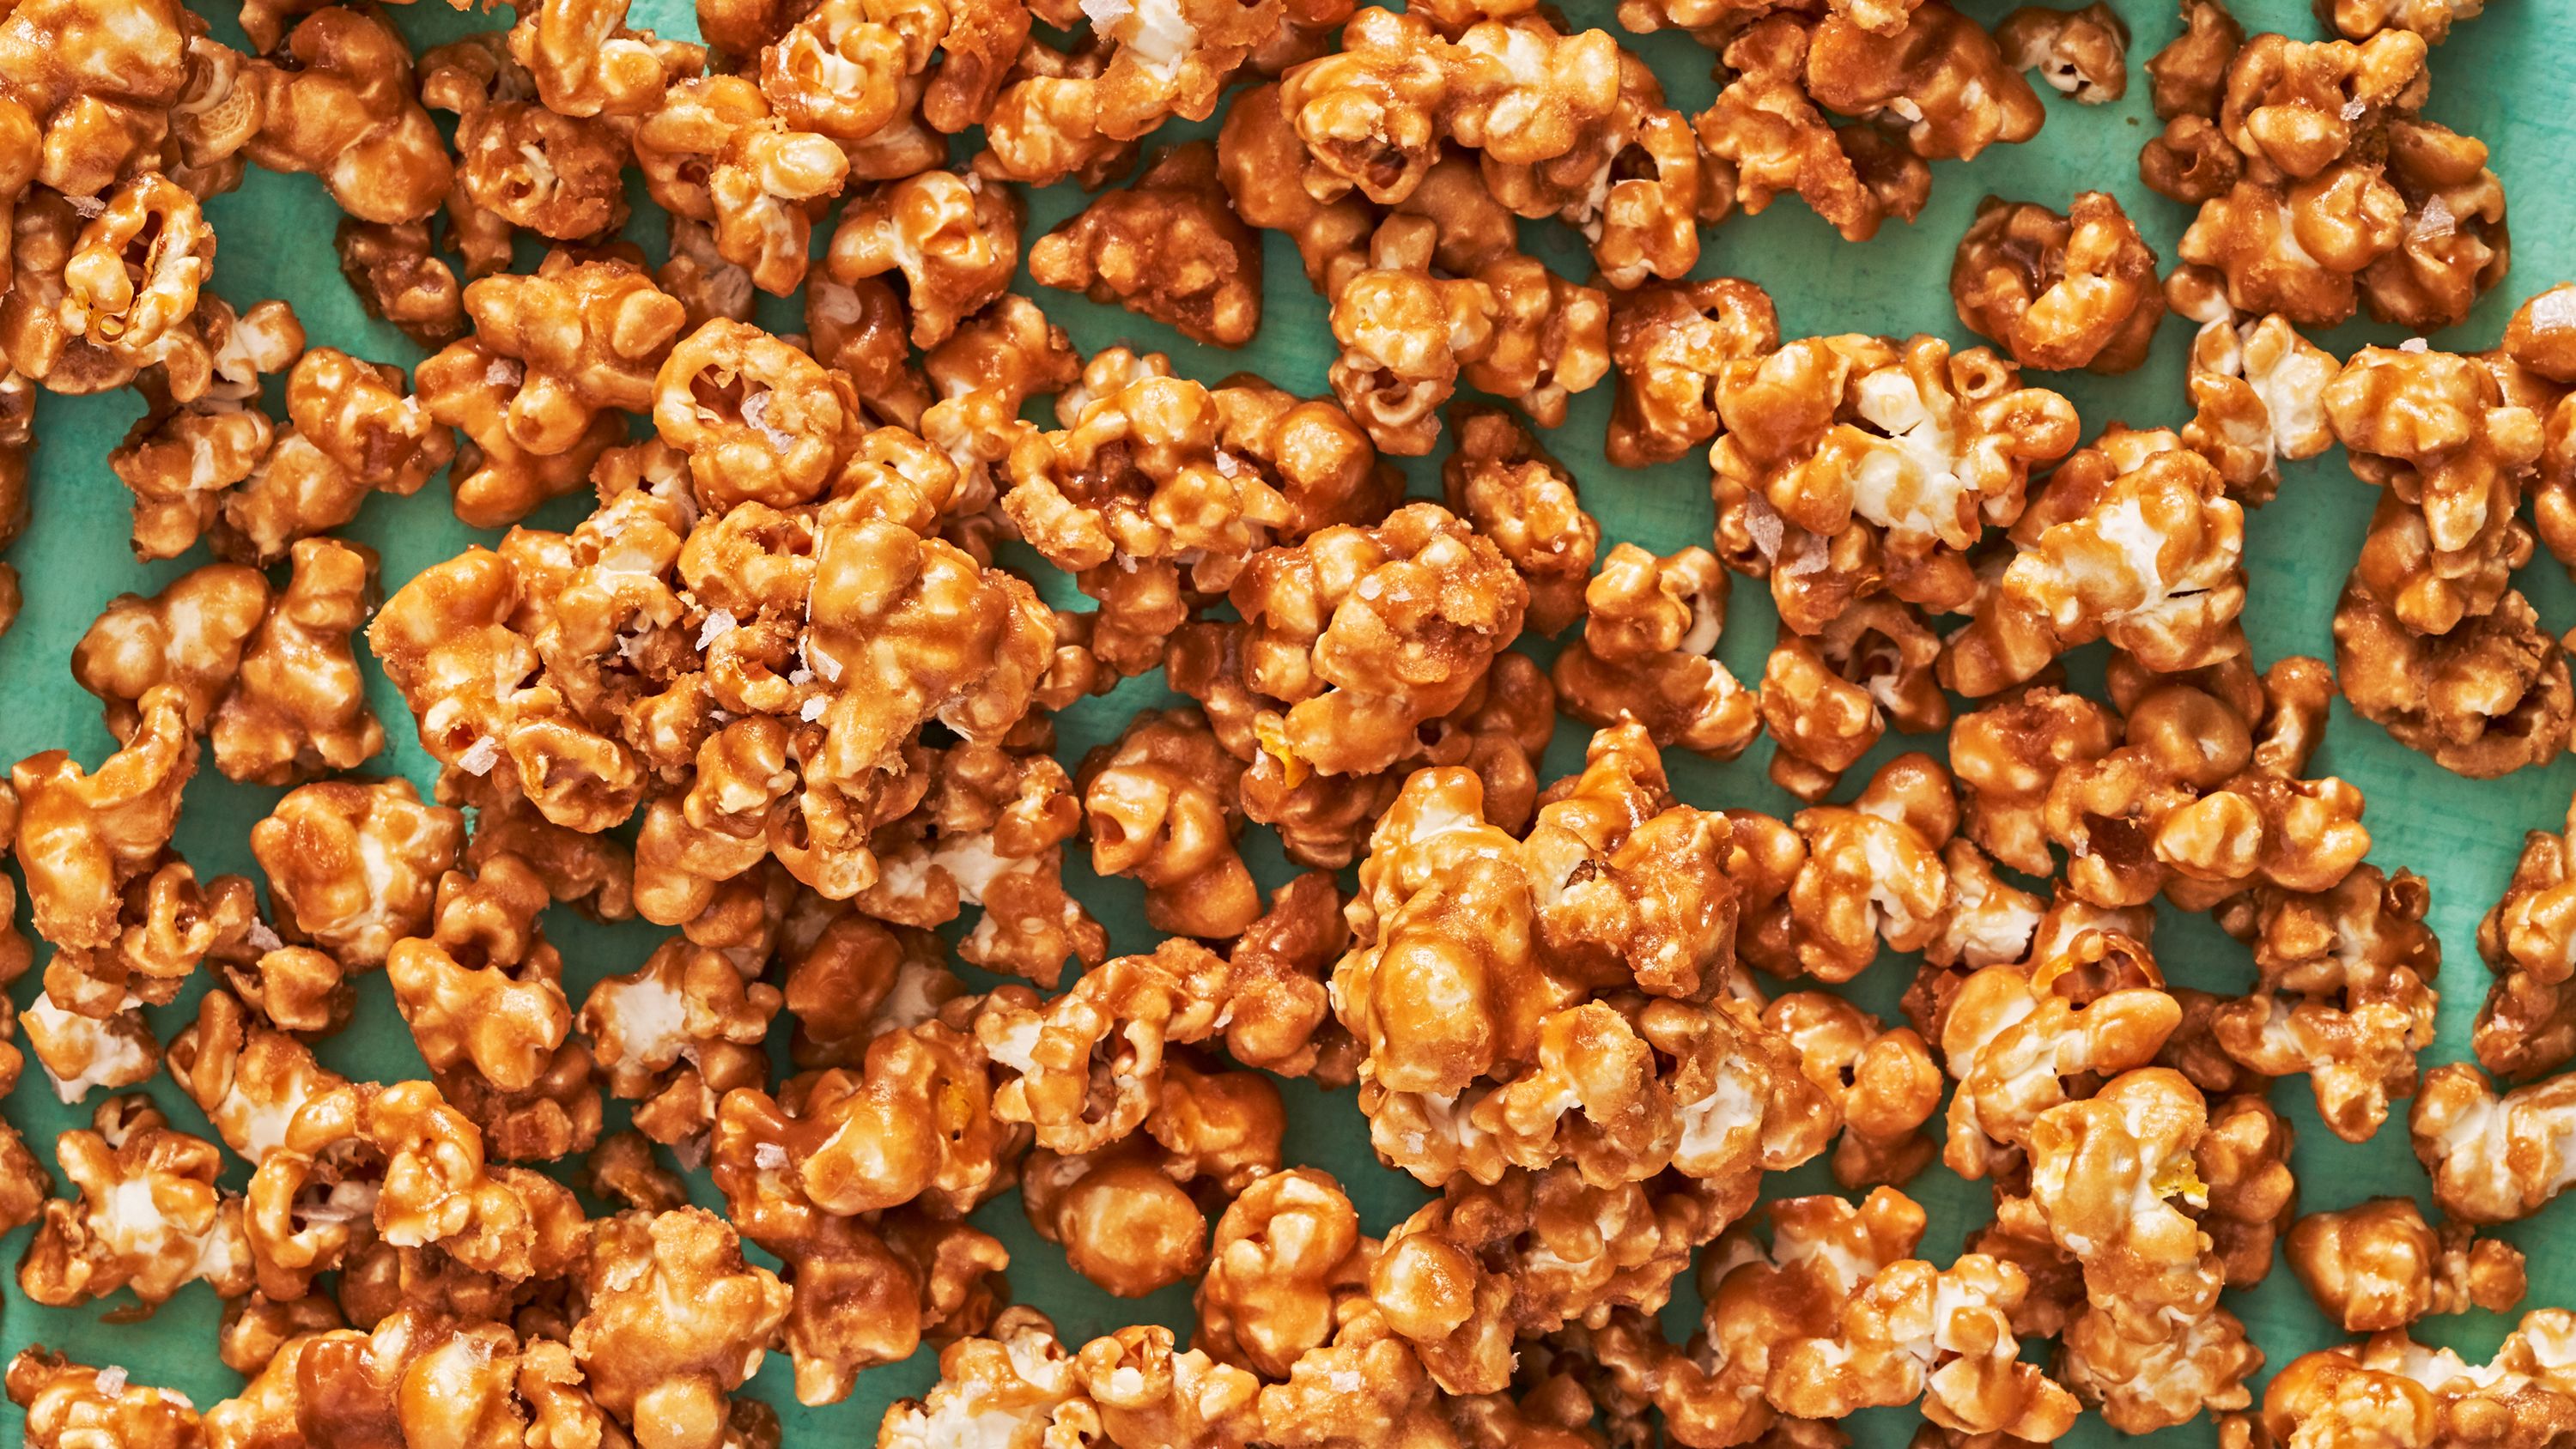 Bacon Caramel Popcorn - The Endless Meal®